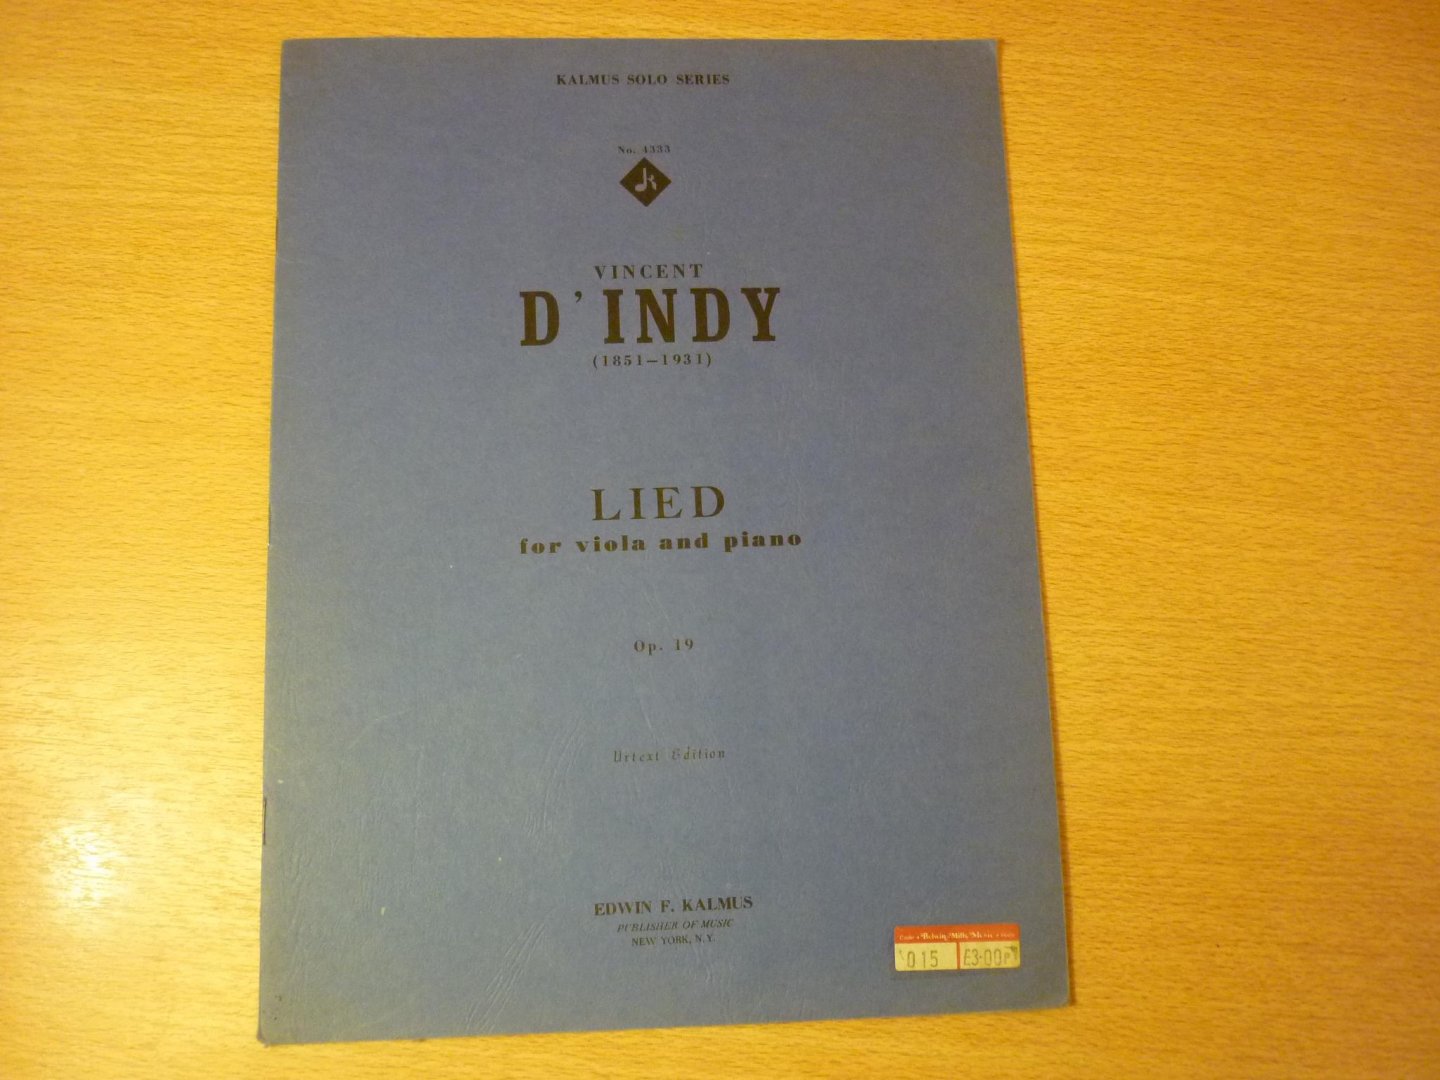 d’Indy; Vincent (1851-1931) - Lied for viola and piano; Opus 19; Urtext Edition